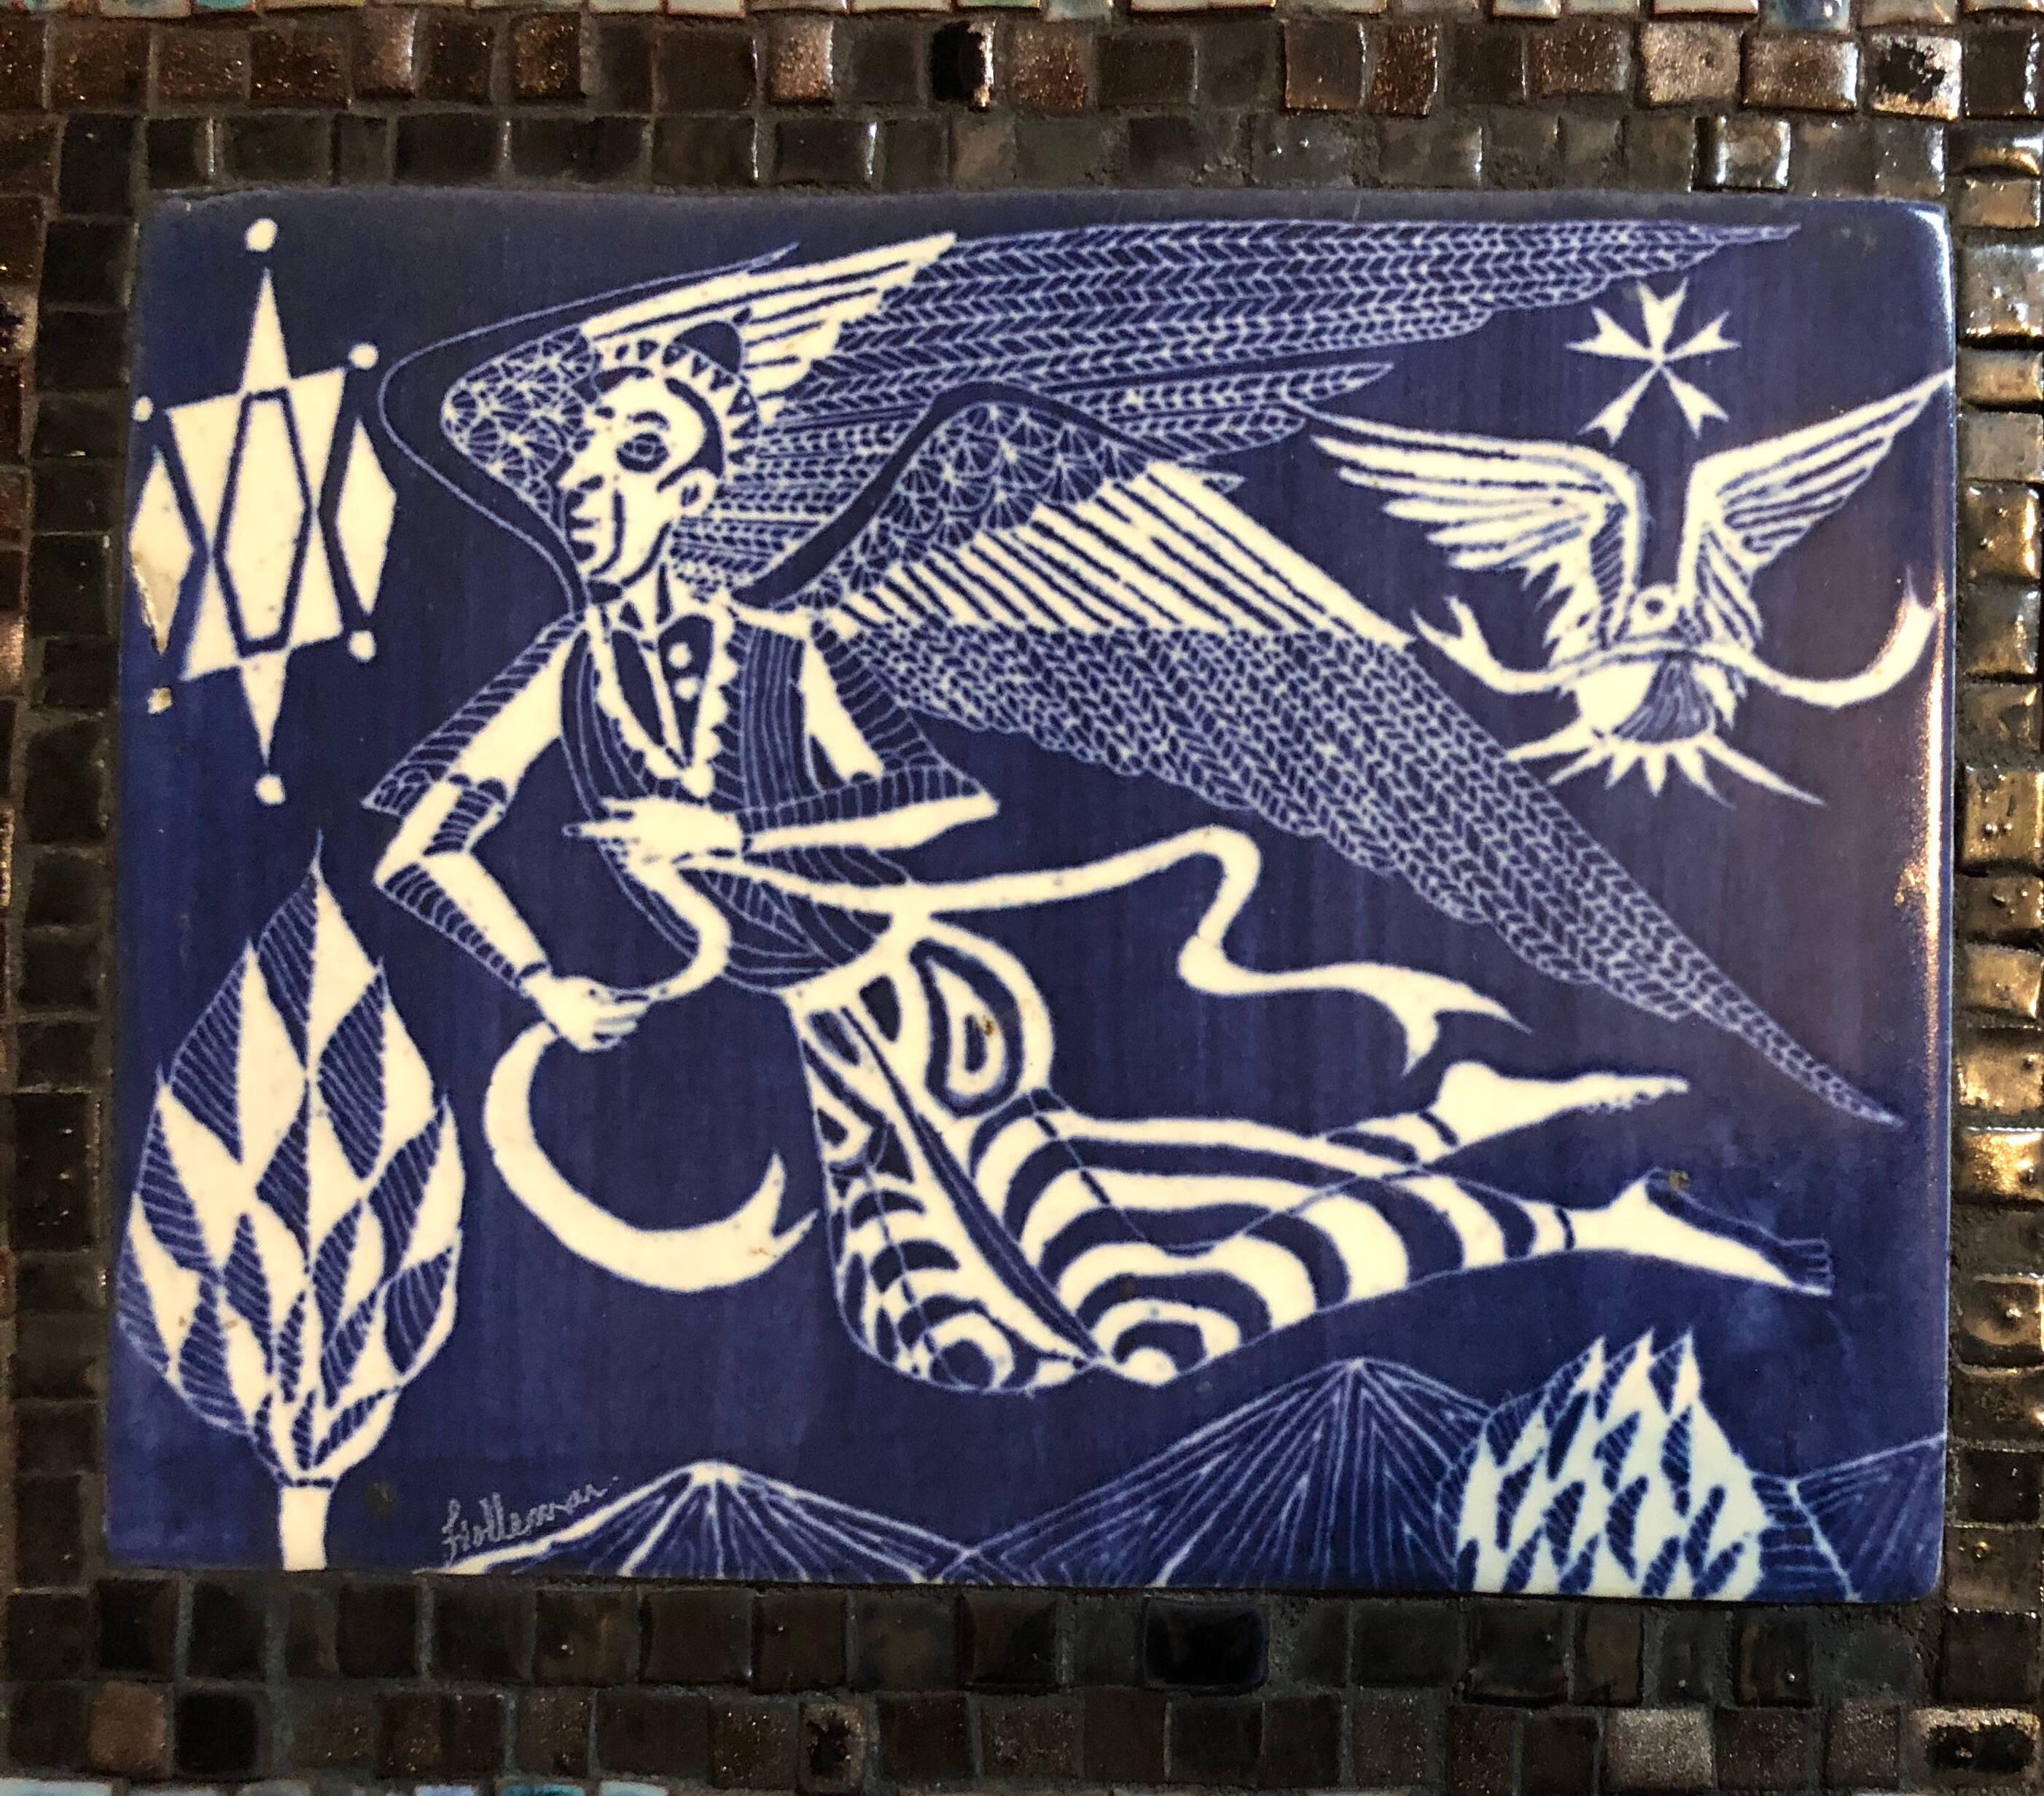 Rare Vintage Judaica Tile Mosaic with Sgraffito Hebrew Calligraphy - American Modern Mixed Media Art by David Holleman